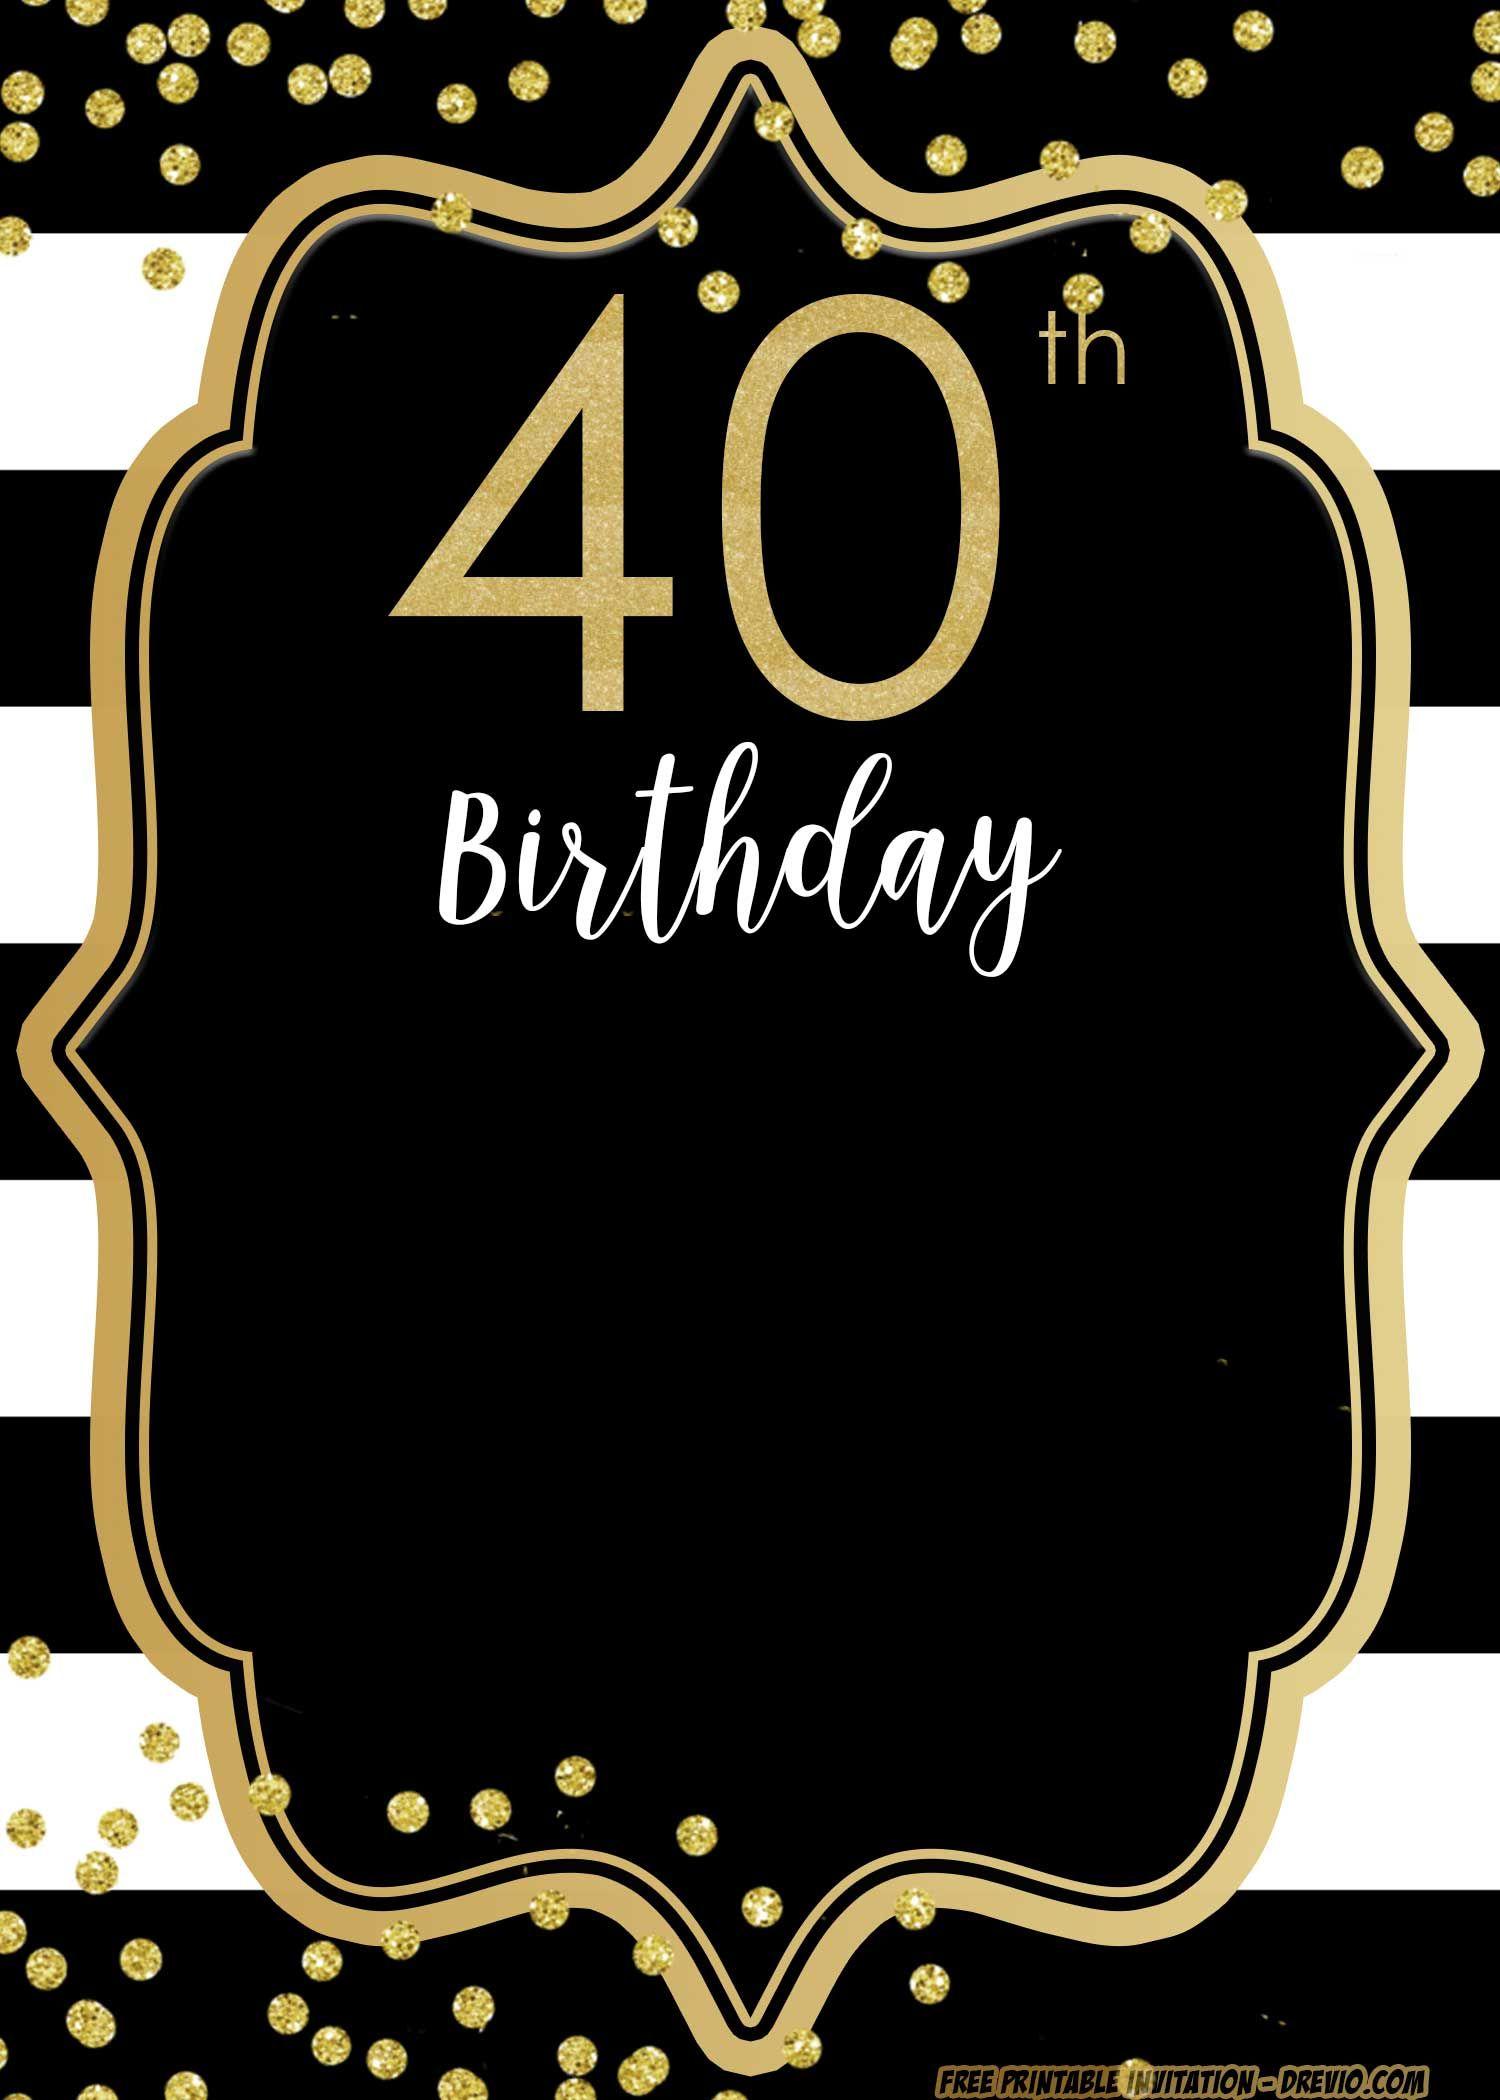 Large Happy Birthday Banner Black Gold Birthday Party Background Decoration  80 x 120CM Birthday Banner Sign Poster Anniversary Decoration Supplies for  30th 40th 50th 60th - Walmart.com